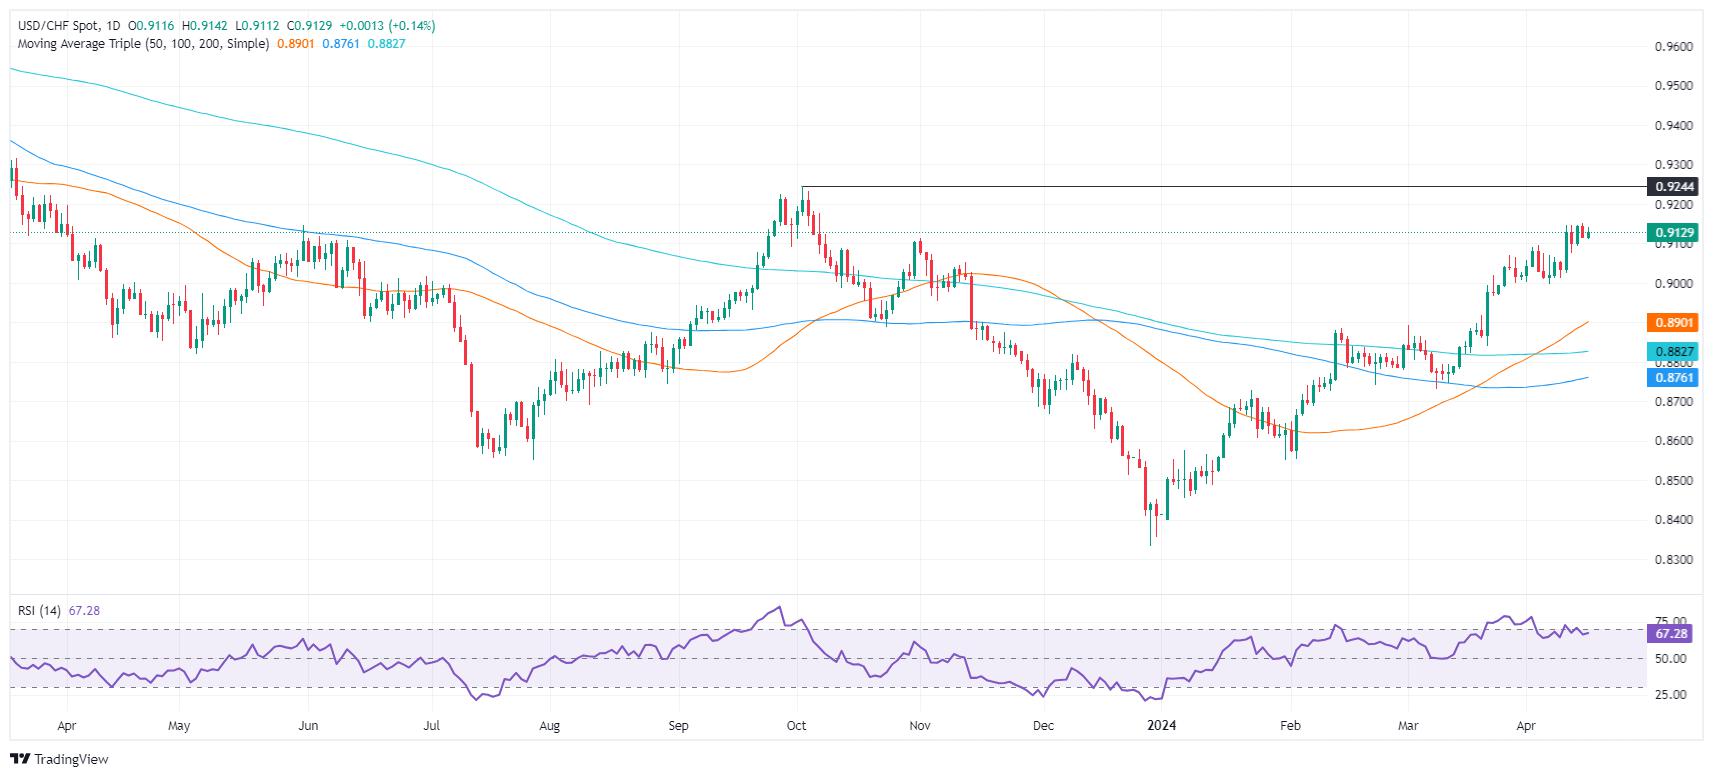 USD/CHF Price Analysis: Consolidates above 0.9100 near YTD highs